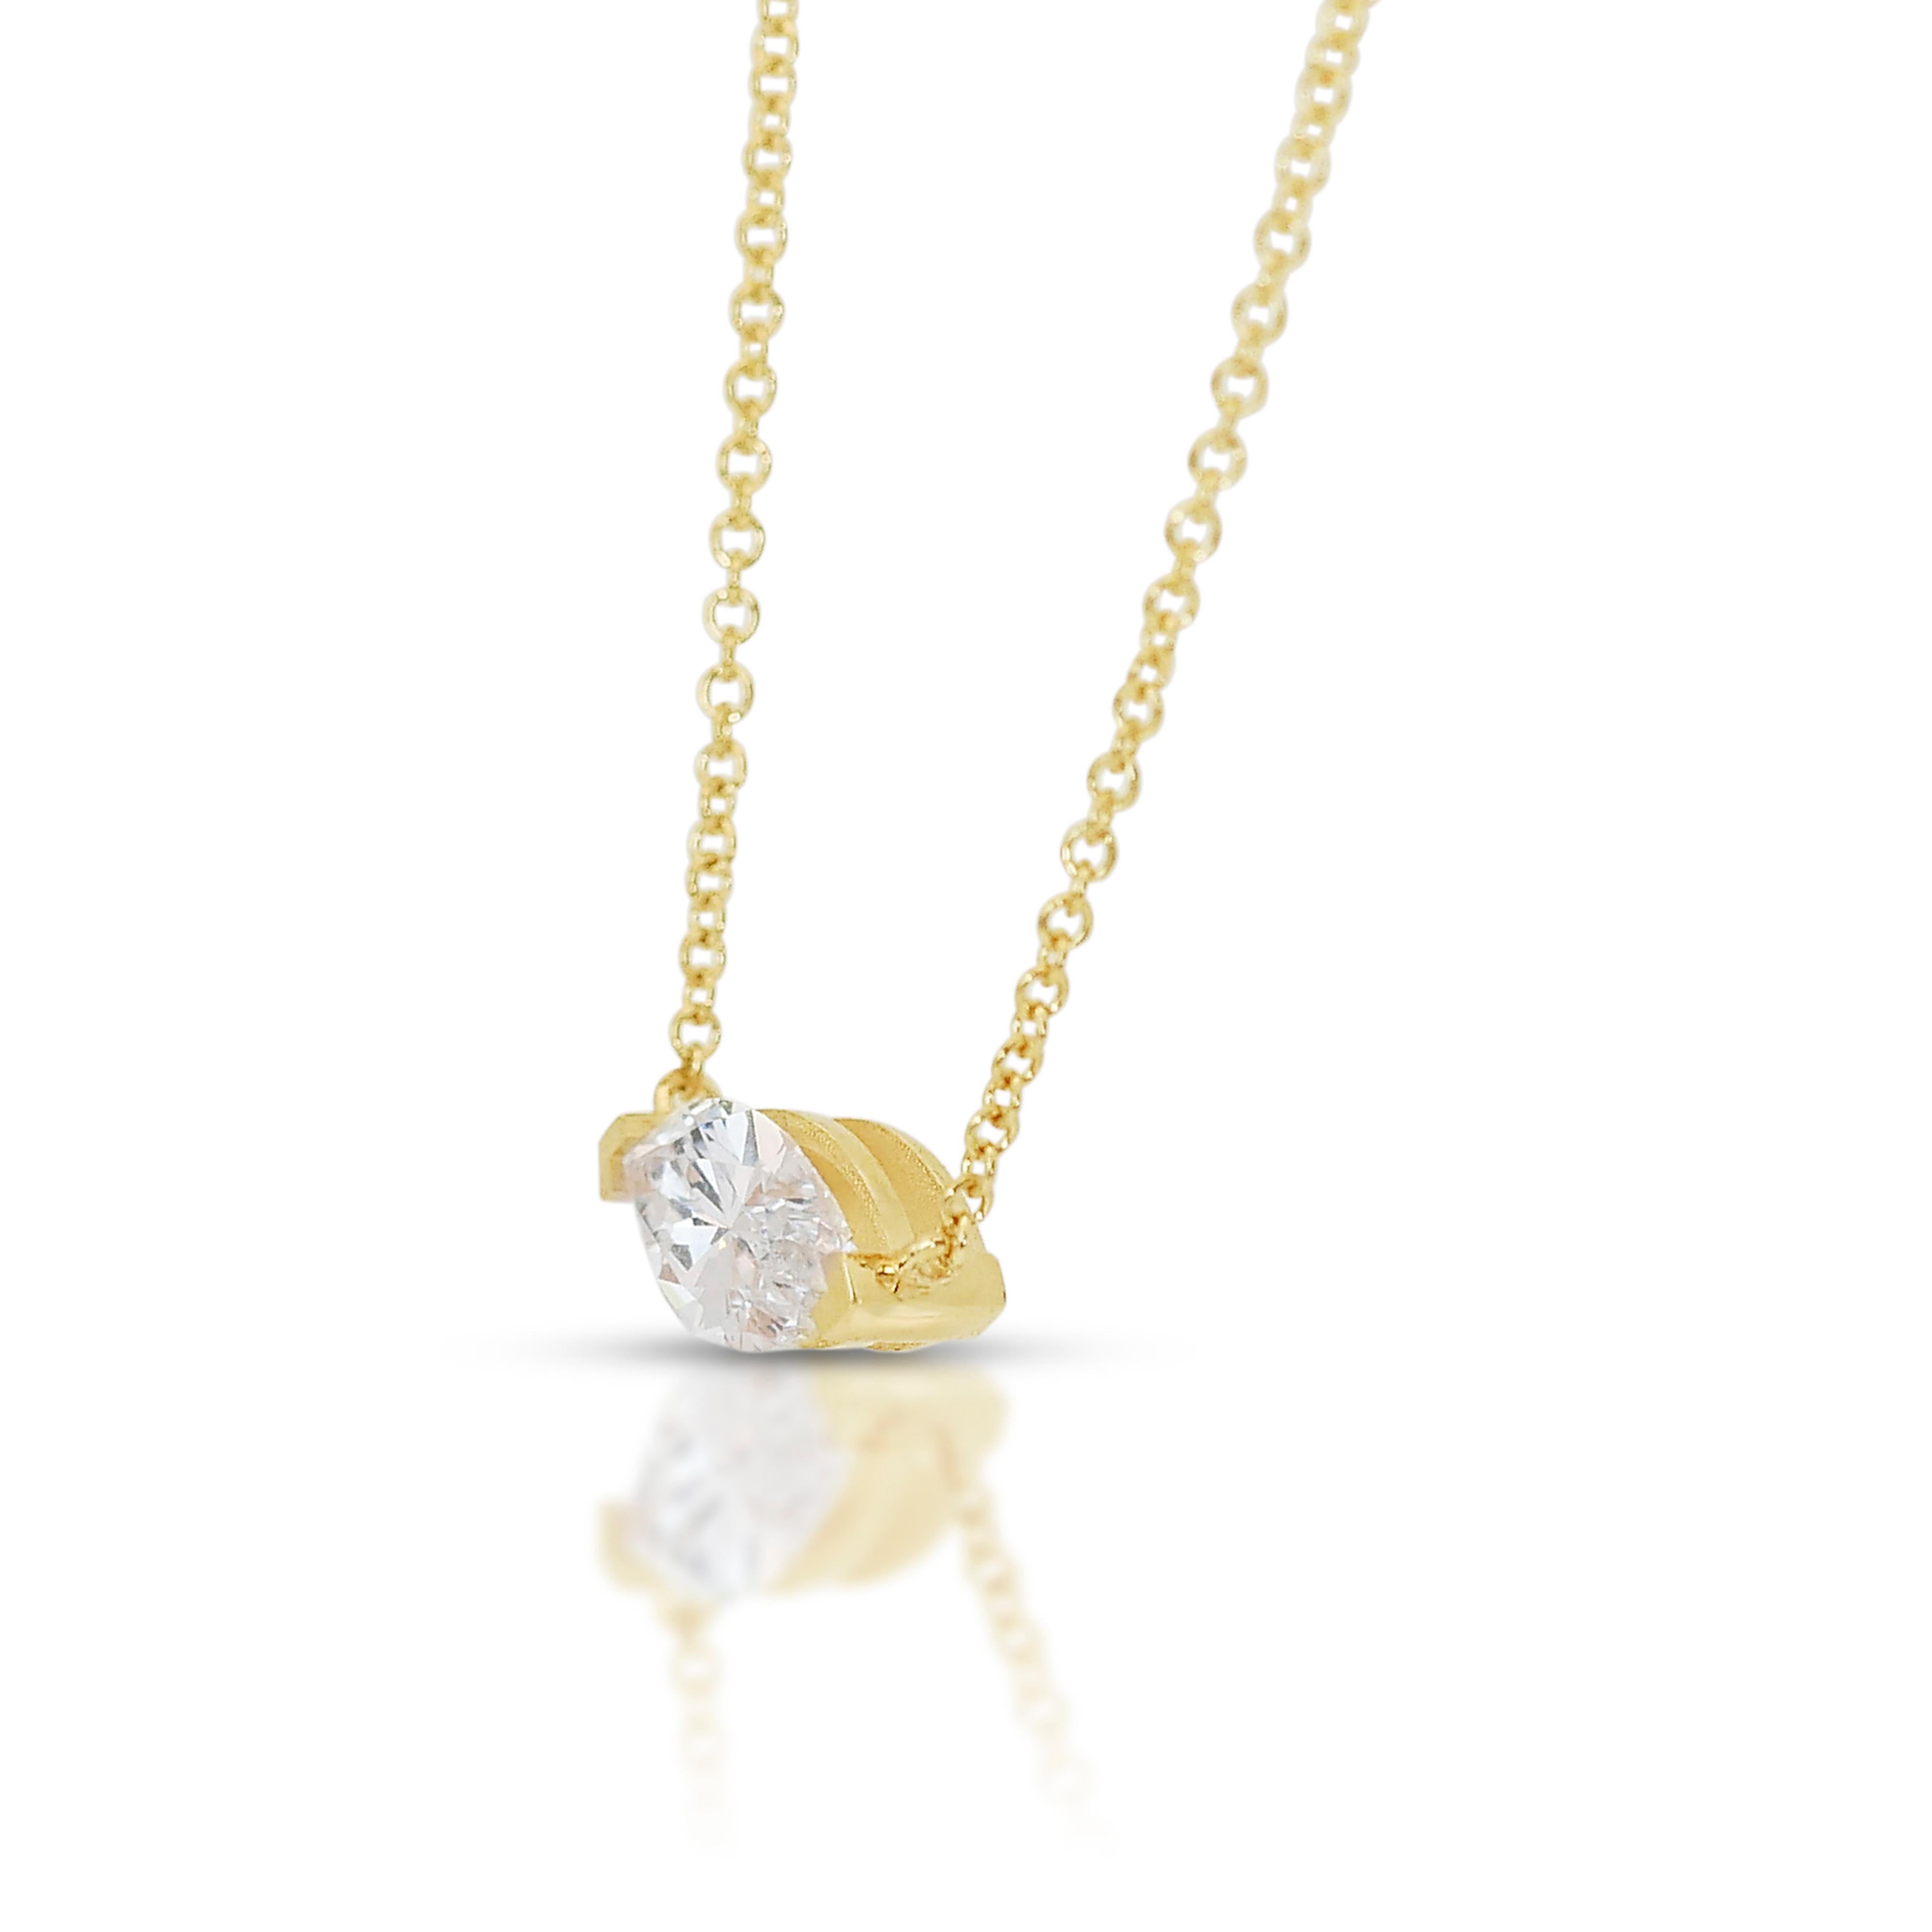 Elegant 1.01ct Diamond Solitaire Necklace in 18k Yellow Gold - GIA Certified For Sale 2